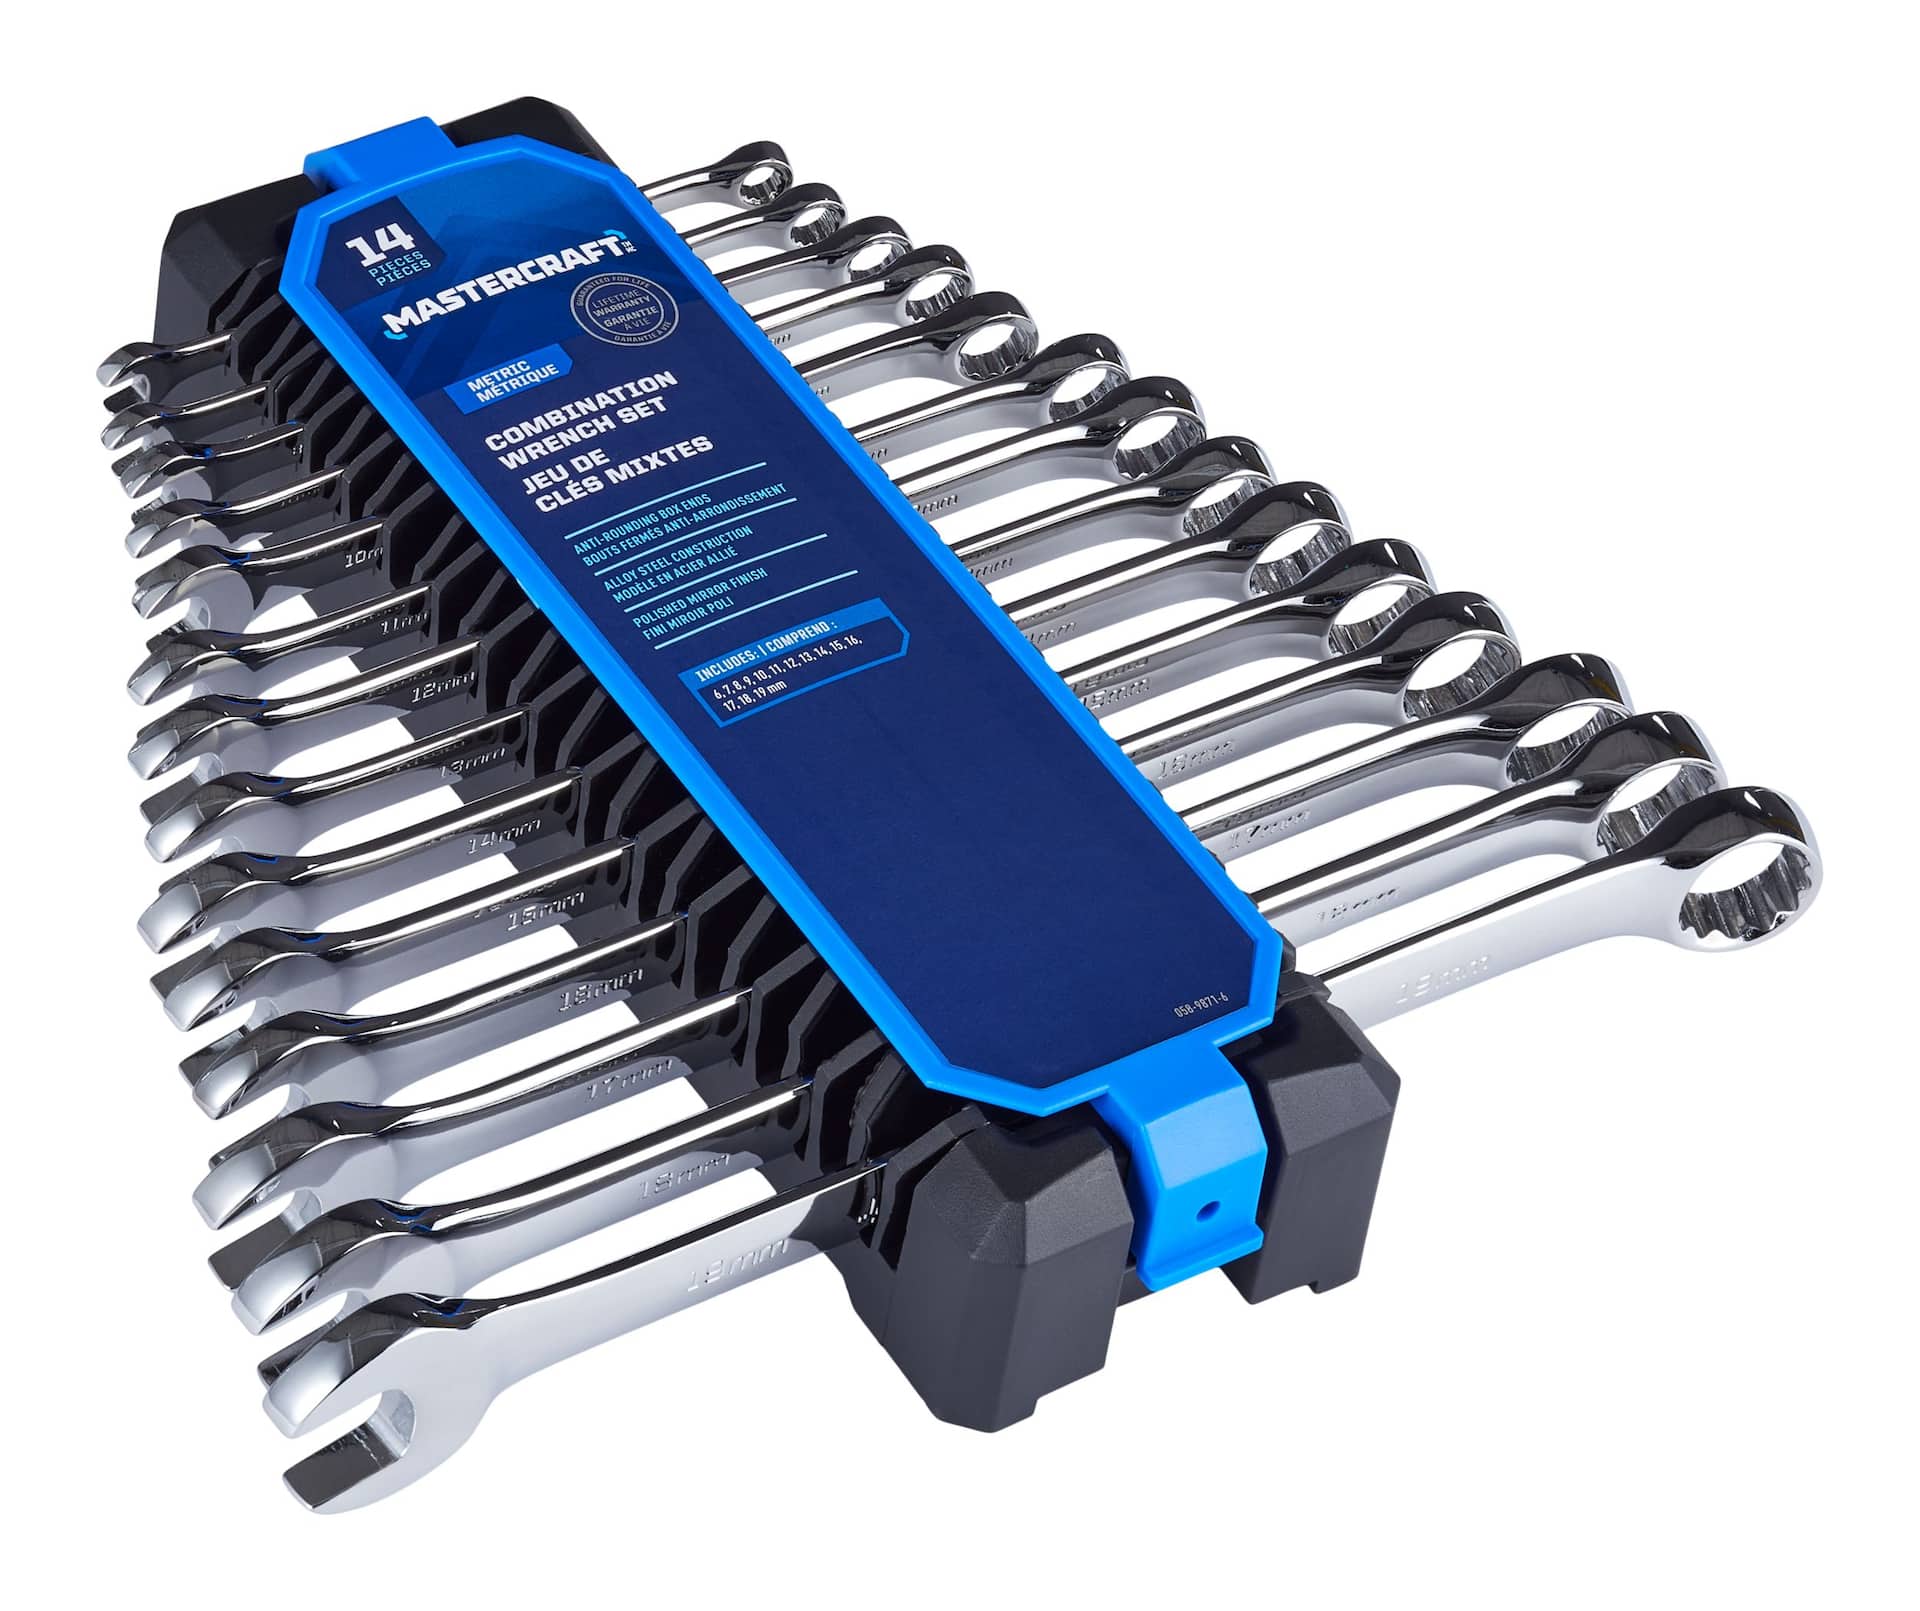 Mastercraft Combination Wrench Set, Metric, 14-pc | Canadian Tire